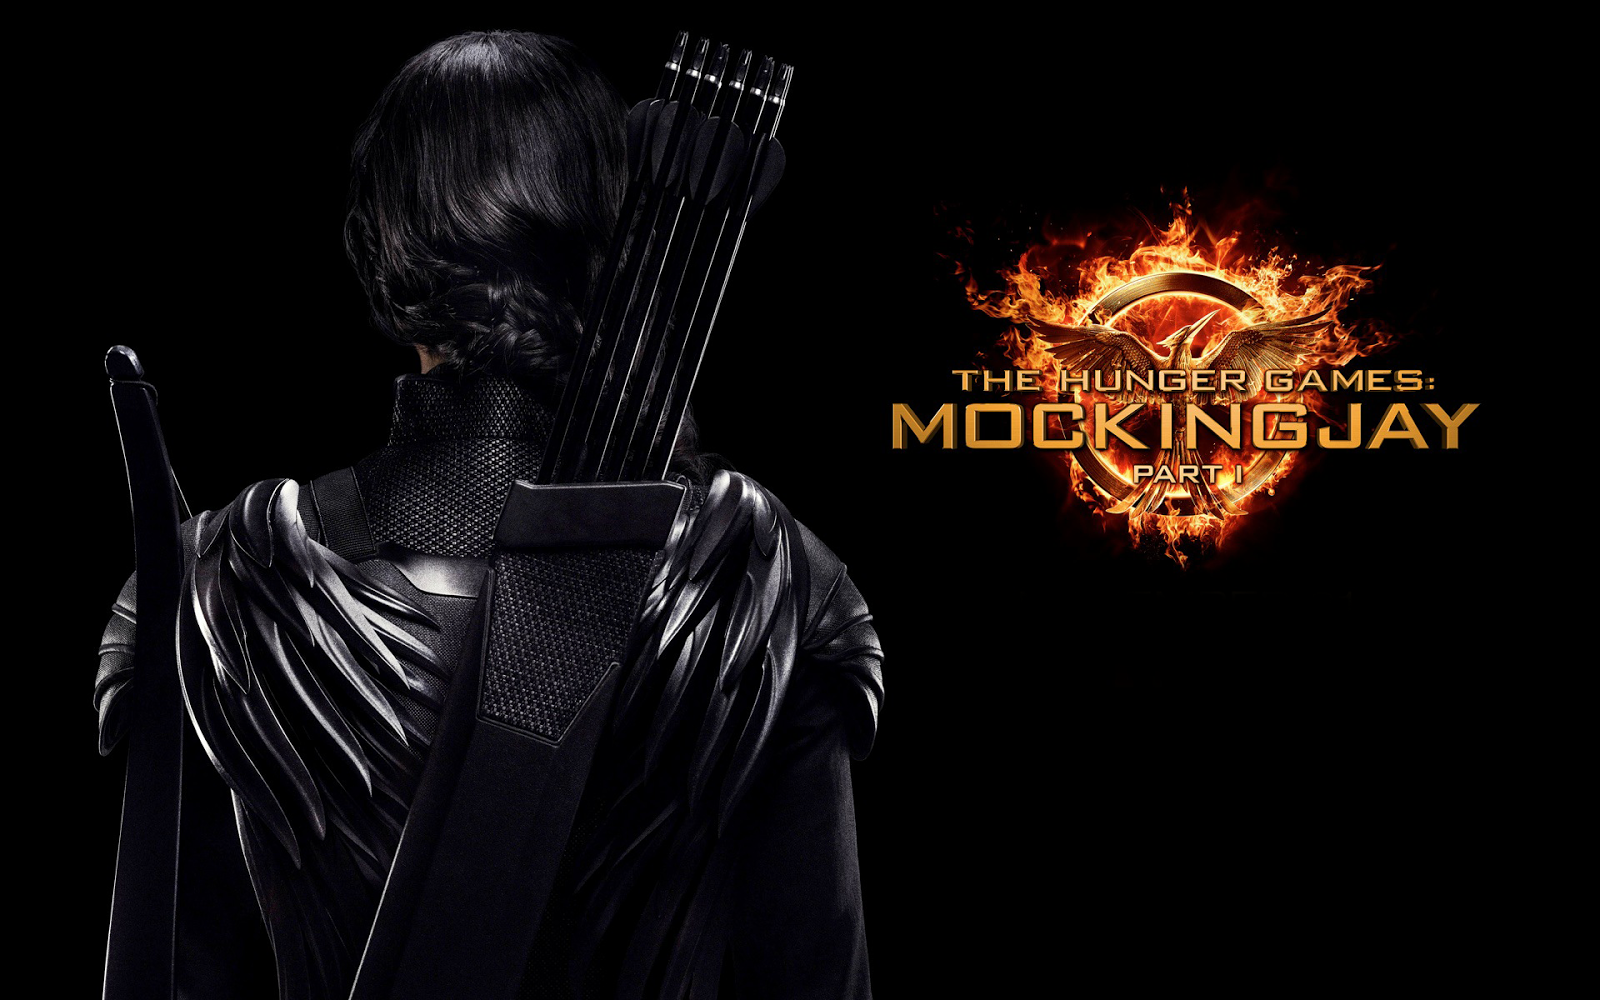 The Hunger Games Mockingjay HD Wallpapers Find best latest The